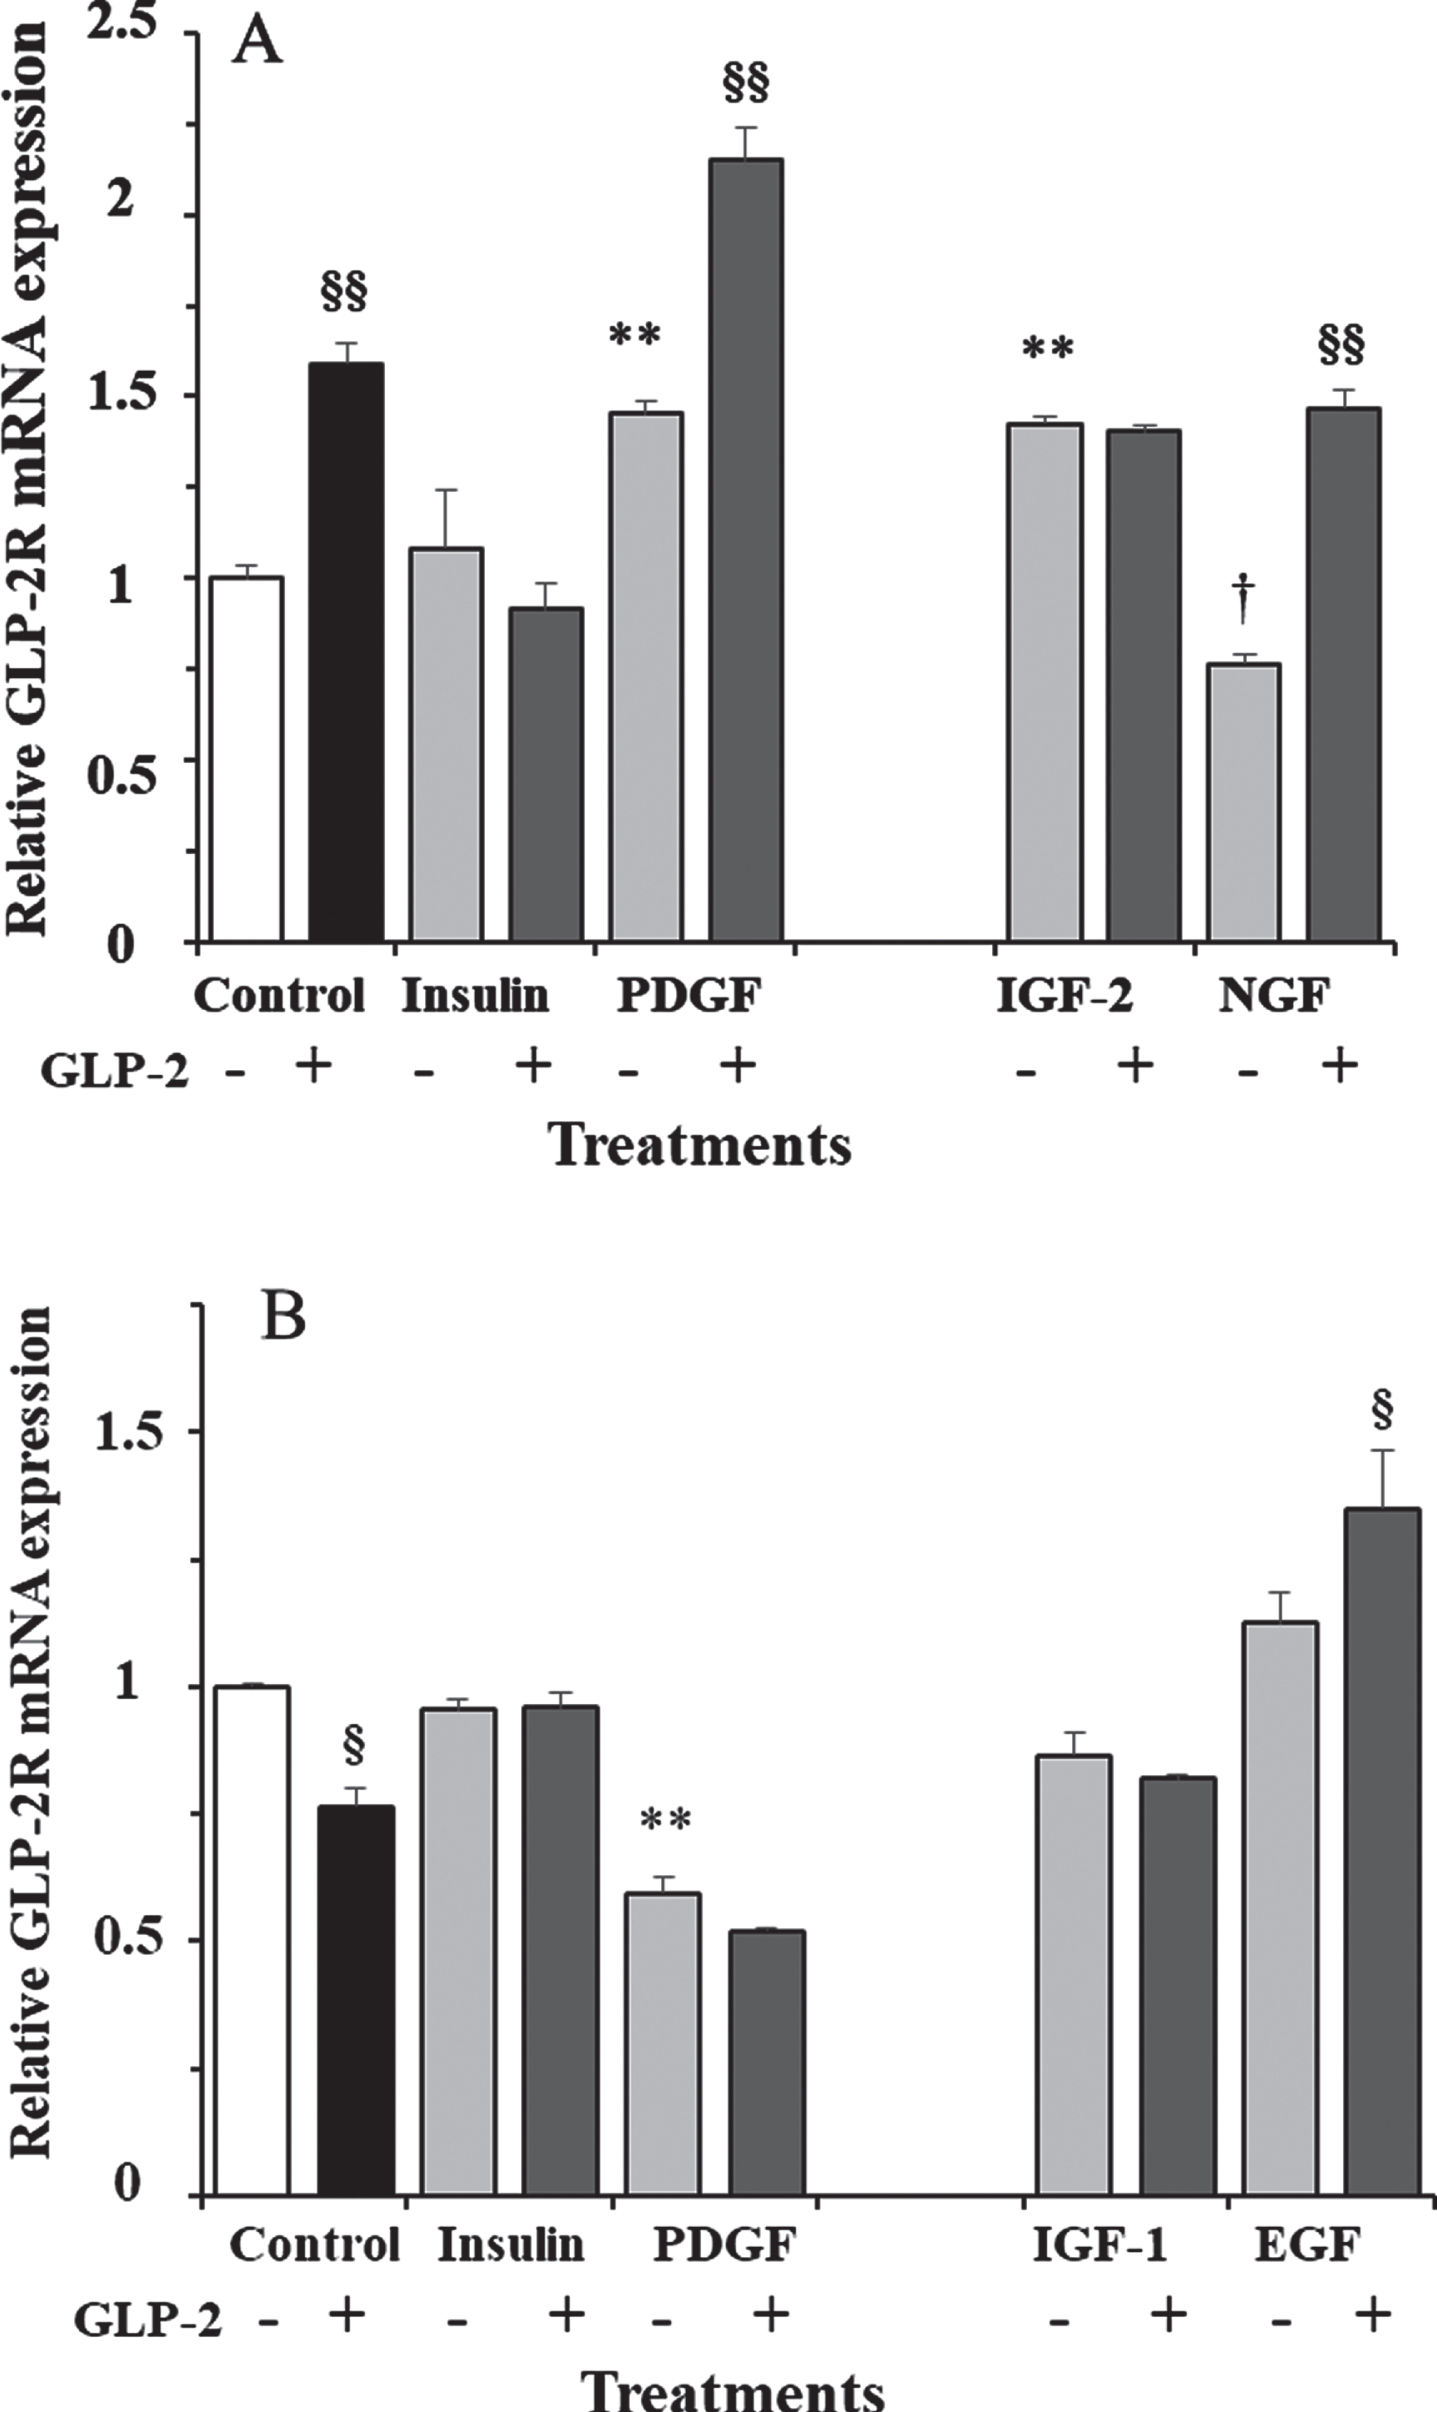 A) Effect of GLP-2 and insulin, PDGF, IGF-2, and NGF in the absence and presence of GLP-2 on the expression of GLP-2R mRNA in cultured rat astrocytes at 30 min of incubation in a medium containing high glucose concentration. B) Effect of GLP-2 and insulin, PDGF, IGF-1 and EGF in the absence and presence of GLP-2 at 18 h. Astrocytes were incubated in a serum-free DMEM/F-12 medium (17.5 mM glucose), supplemented with 2 mg/mL BSA (control), and 10 nM GLP-2 and with 100 nM insulin, 1 nM PDGF, 10 nM IGF-2, 1 nM NGF, 10 nM IGF-1, or 10 nM EGF for the times indicated, in the absence and in the presence of 50 nM GLP-2. The GLP-2R mRNA was analyzed using real-time quantitative RT-PCR as indicated in the experimental procedures. Results are presented as the mean±SEM (n = 6 in all of treatments). *p < 0.05 (†p < 0.06); **p < 0.01, significant effect of stimuli on gene expression compared to control cells, using 1-way ANOVA with Dunnet correction. §p < 0.05; §§p < 0.01, when comparing GLP-2 treated and untreated ones, using 1-way ANOVA with Bonferroni correction.